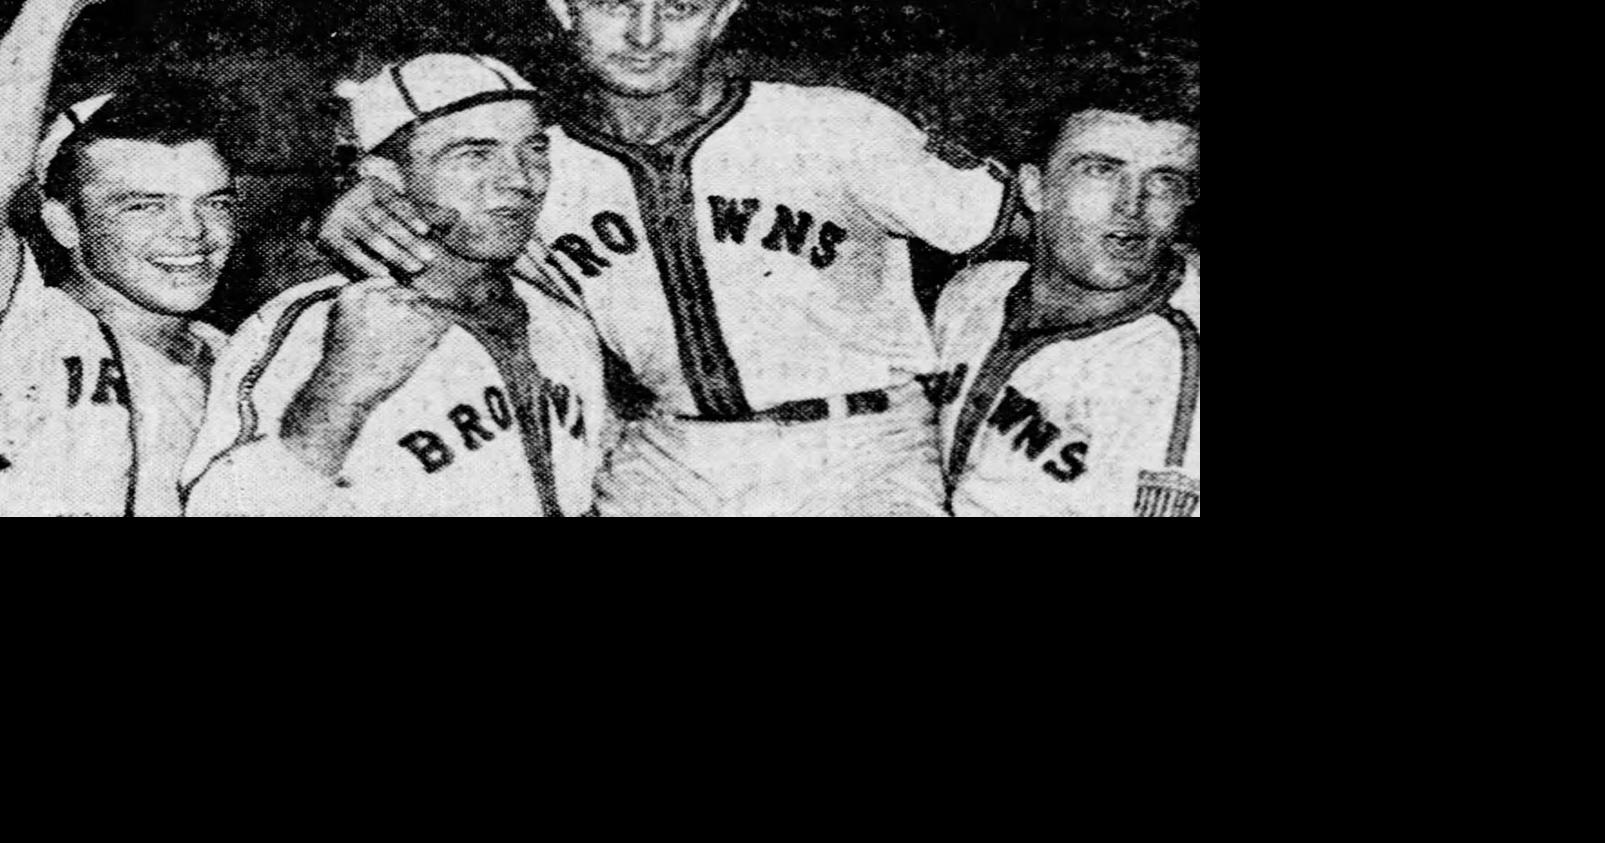 History of the St. Louis Browns 